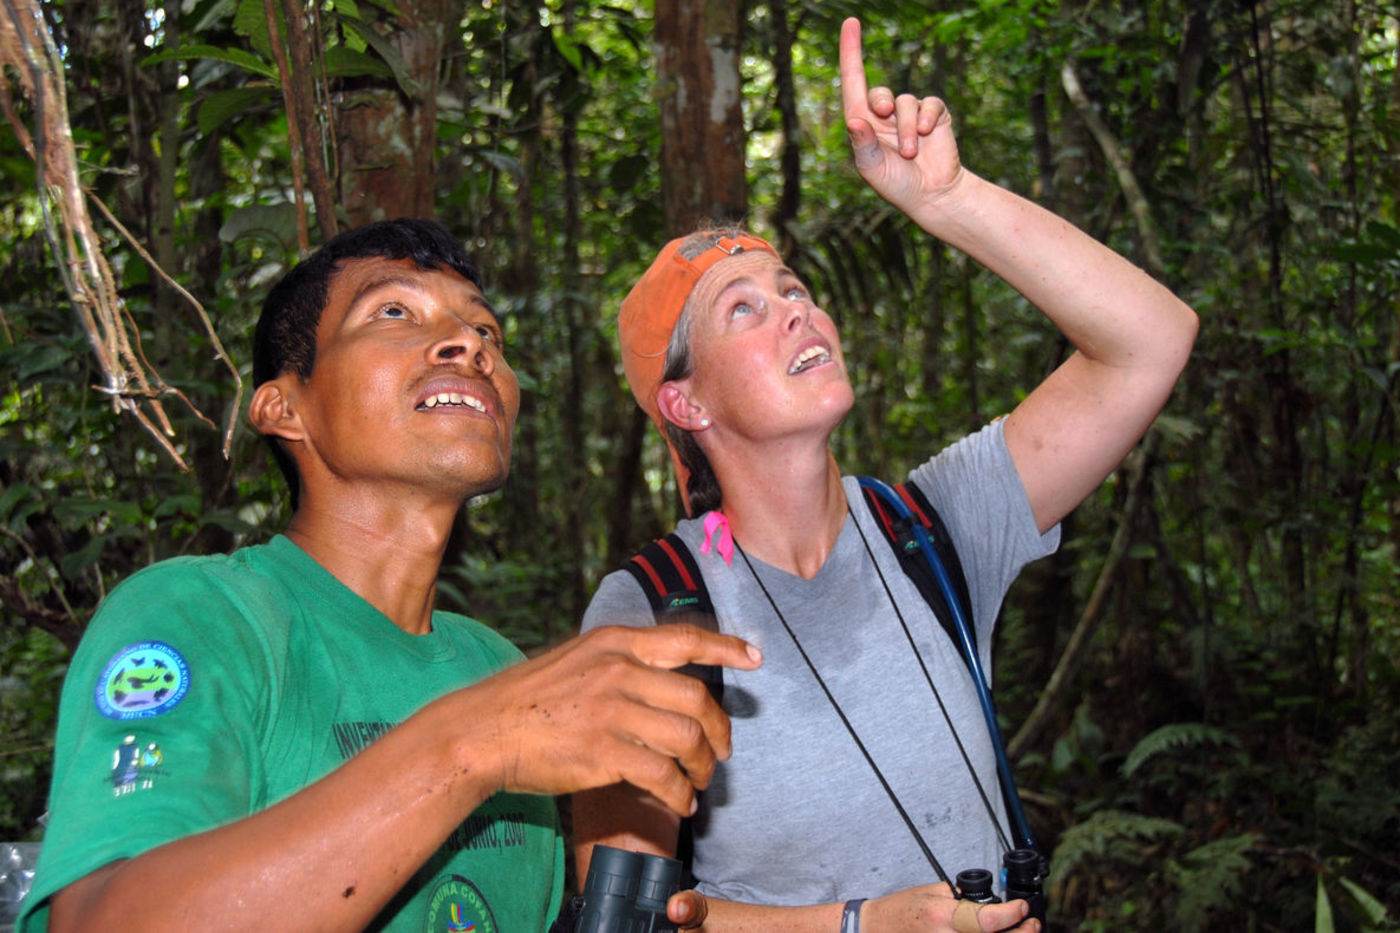 Museum and local scientists perform rapid inventories in the Amazon rainforest to gather information about as many of the plants and animals living there as possible.